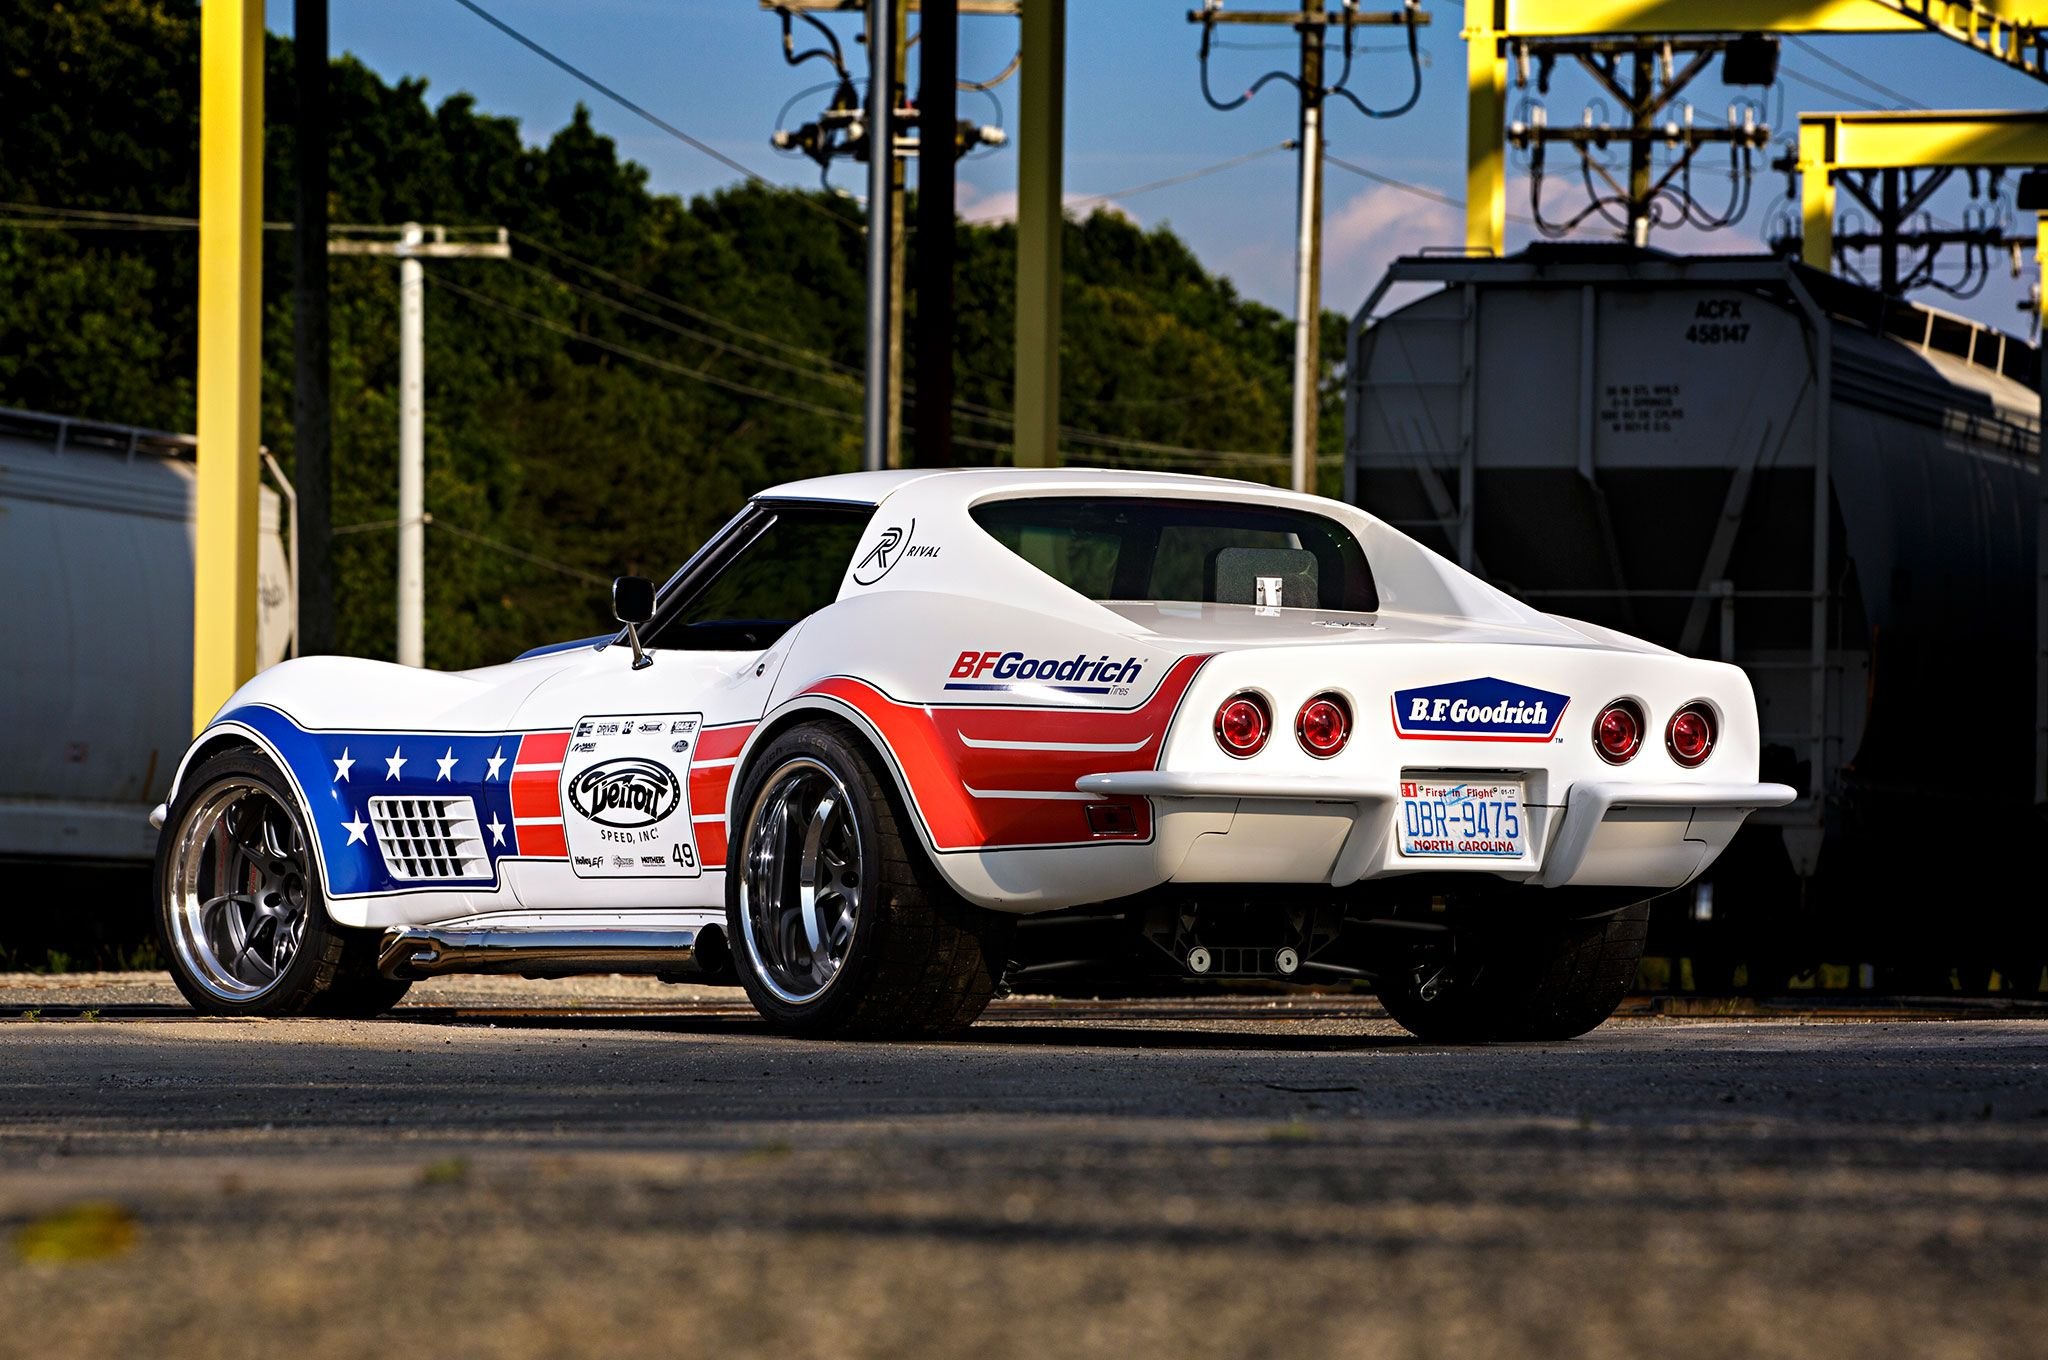 White Coloured Chevy Corvette with BFGoodrich Tires - Photo by Forgeline Motorsports